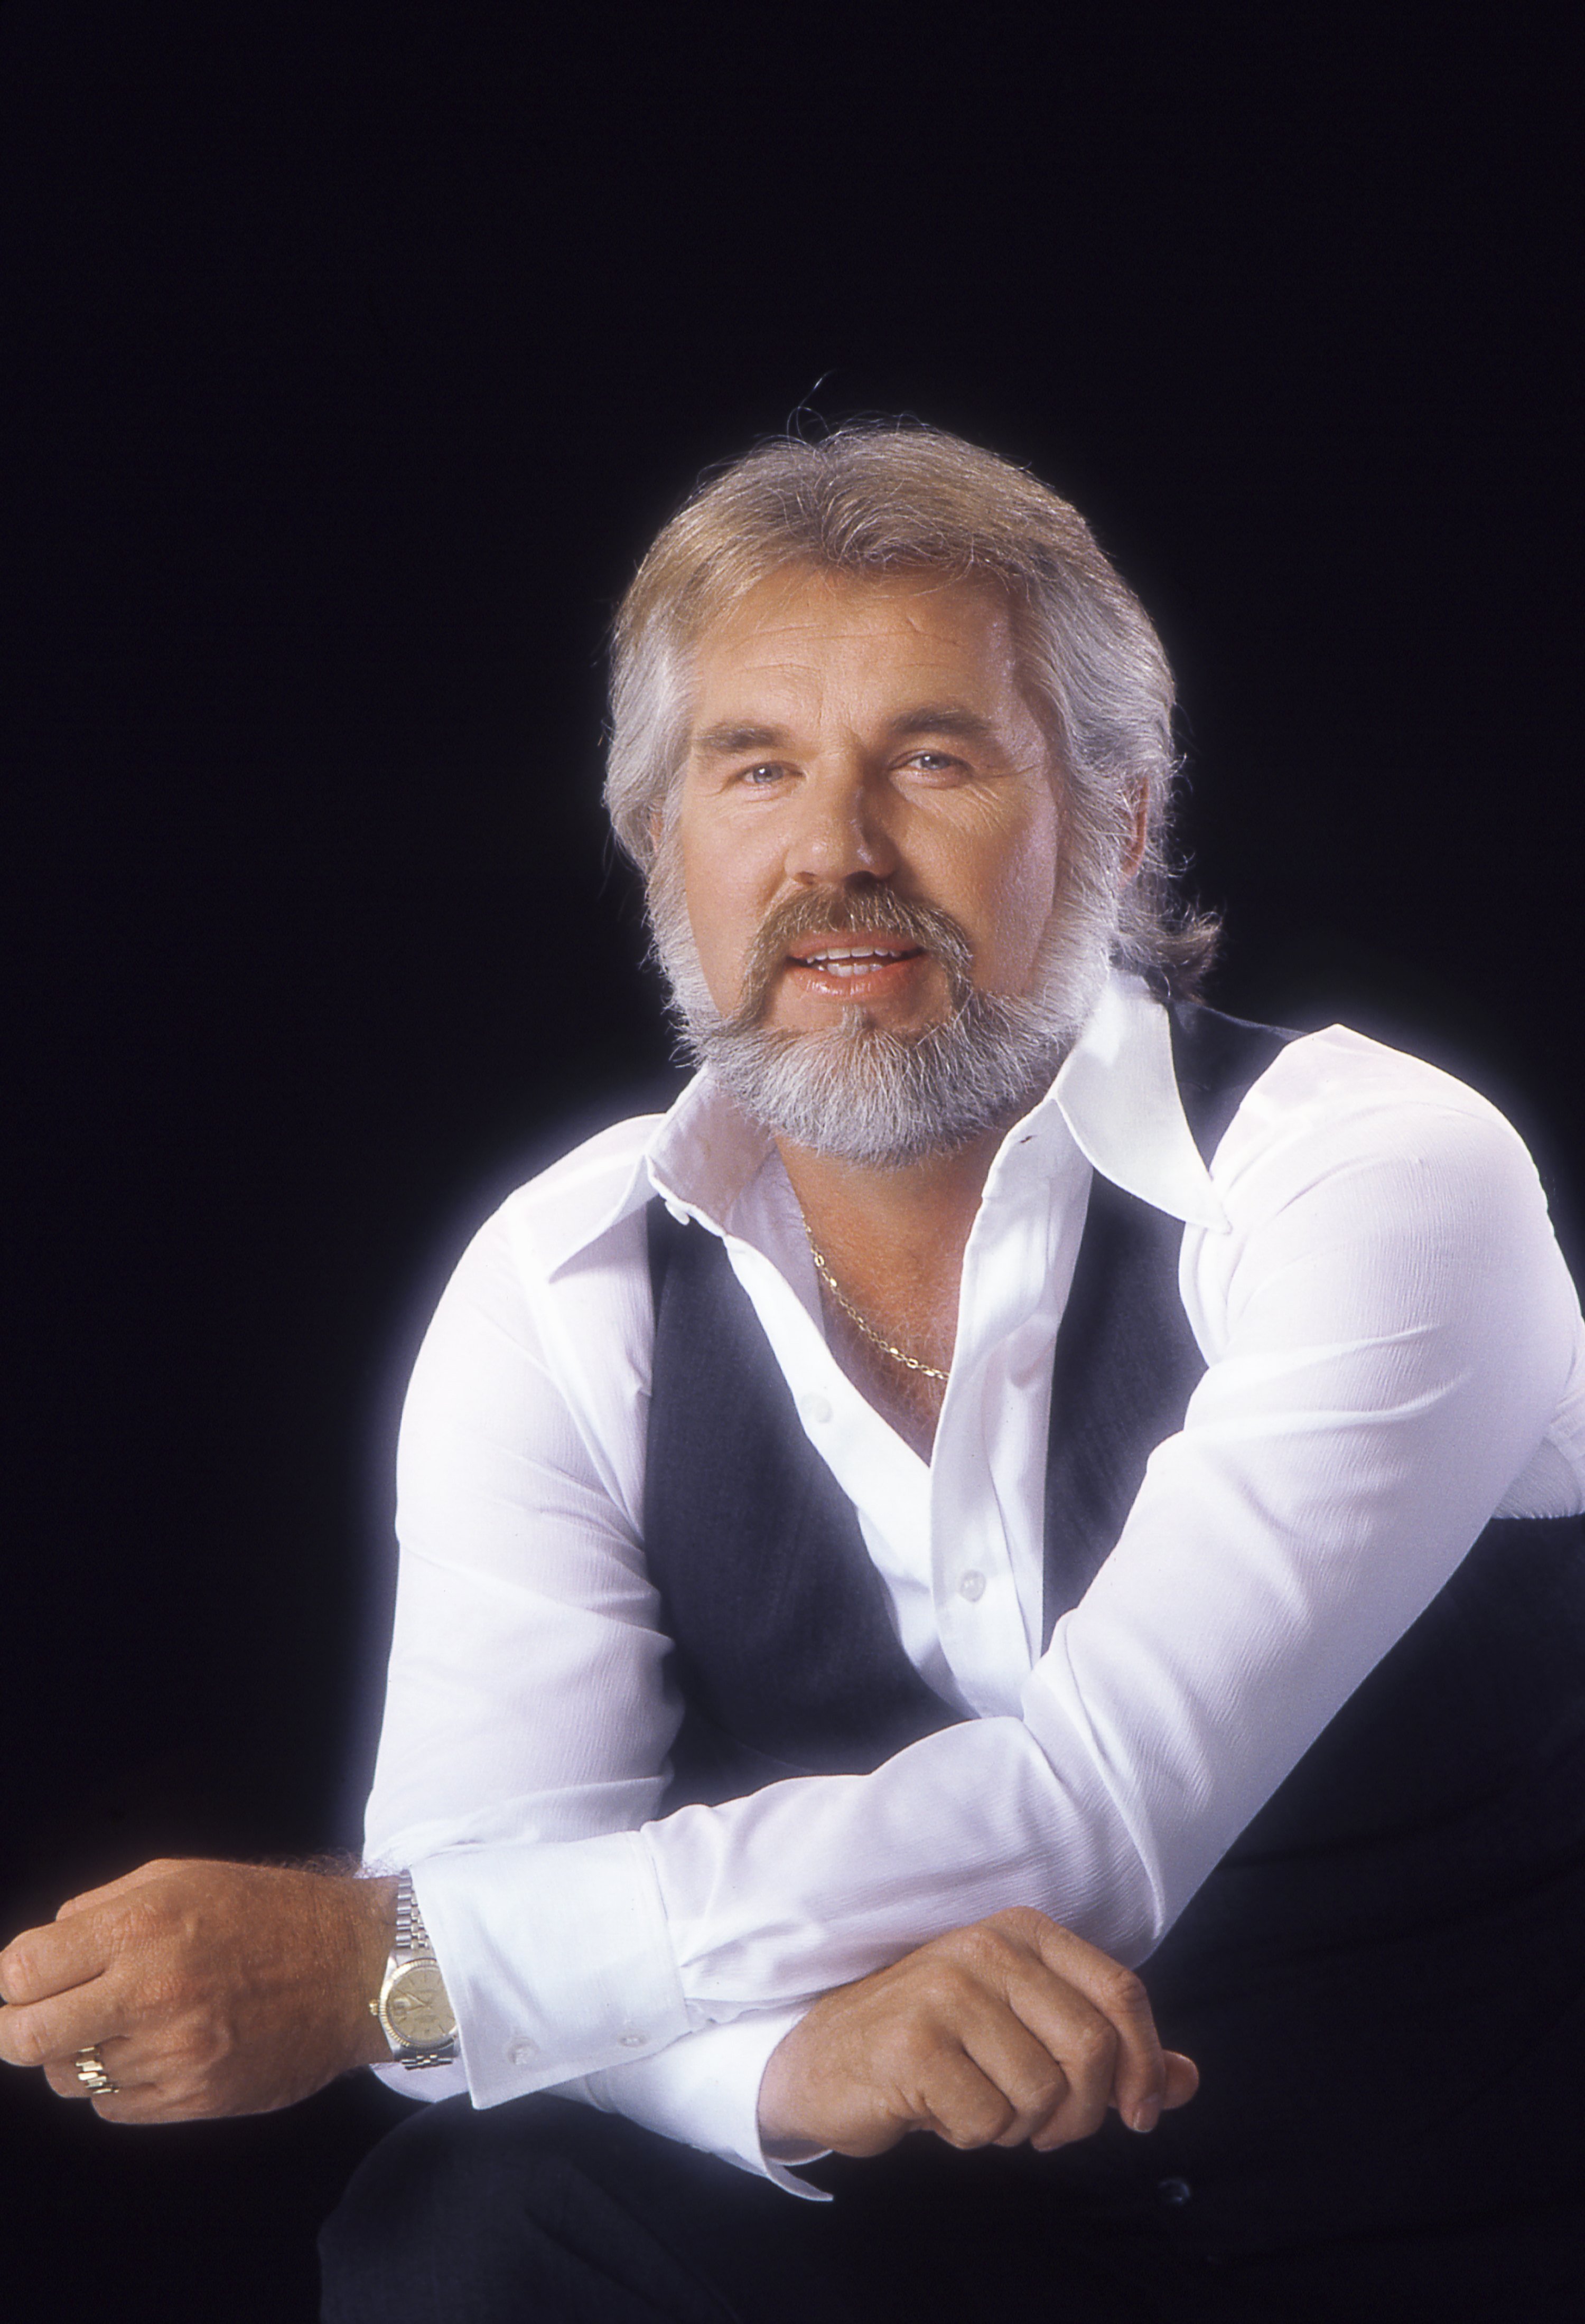 Country music icon Kenny Rogers, responsible for hit albums such as "Kenny" and "Eyes That See in the Dark," posing for a portrait in 1979 in Los Angeles, California | Photo: Getty Images